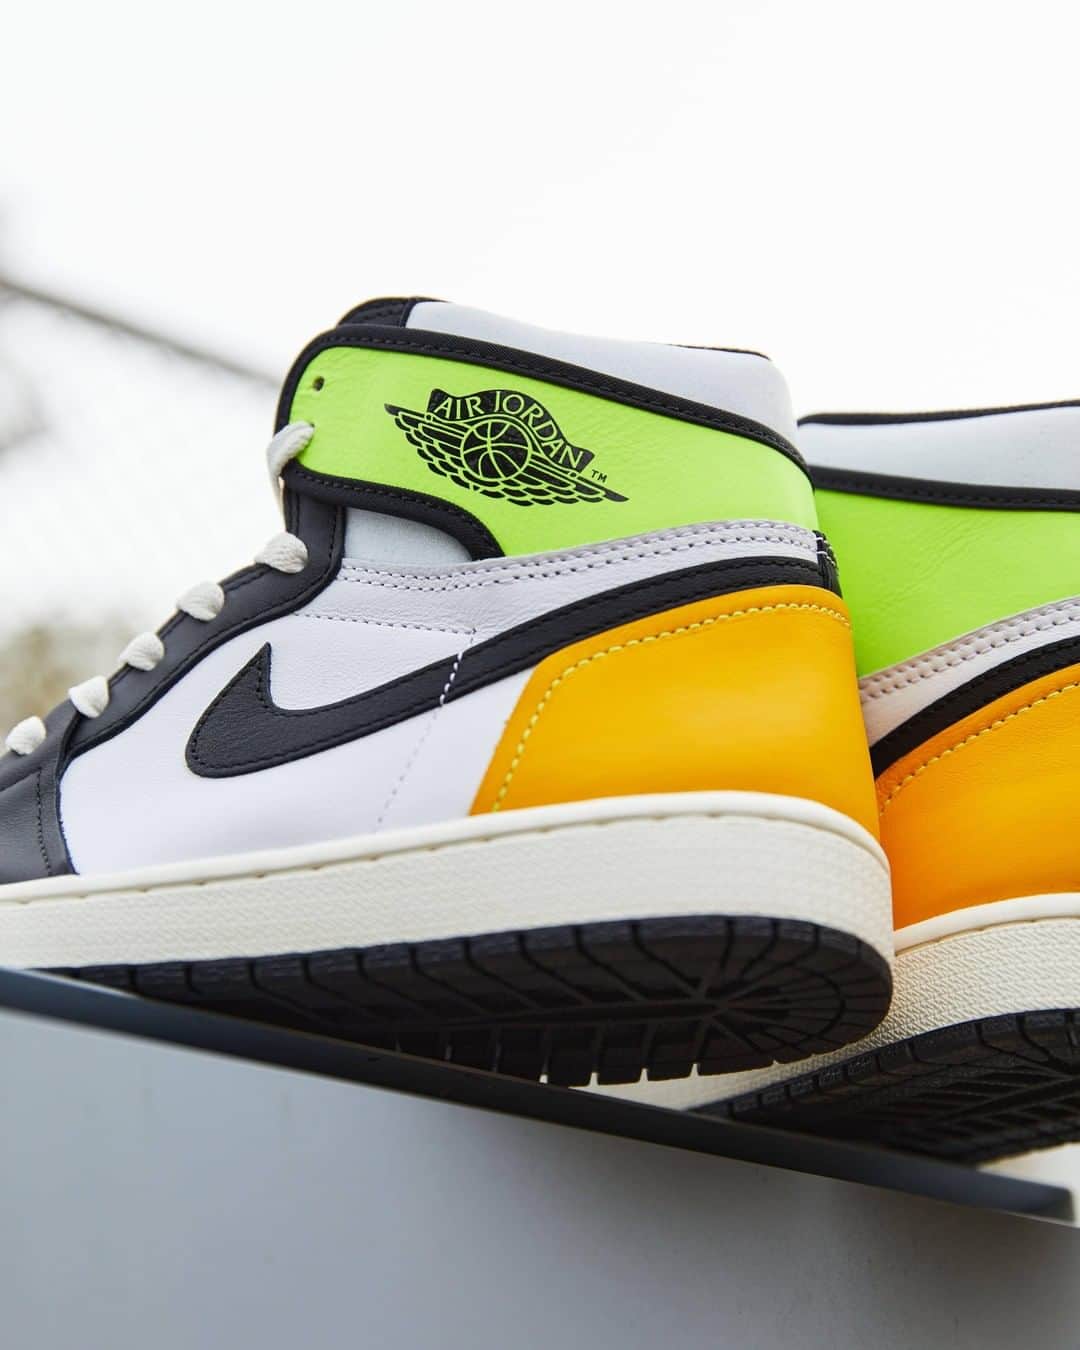 アトモスさんのインスタグラム写真 - (アトモスInstagram)「. 1/16(SAT)より、AIR JORDAN 1 RETRO HIGH OG "Volt Gold"が登場。 本革と合成皮革をアッパーに使用し、優れたクッショニングを発揮するAir-Soleユニットを内蔵したソリッドラバーのカップソールを採用。深いフレックスグルーブ (アウトソールやミッドソールにある溝) と同心円状のアウトソールパターンが、柔軟性に優れたトラクションを発揮。シュータンに露出したフォーム、トランスルーセント仕様のタグはデコンストラクトデザインを演出。ボルト、セイル、ユニバーシティゴールドの3色のカラーブロックデザインが、時代を超越したシルエットに力強いエネルギーを加える。 . From 1/16 (SAT), AIR JORDAN 1 RETRO HIGH OG "Volt Gold" will be released. A solid rubber cup sole with a built-in Air-Sole unit that uses genuine leather and synthetic leather for the upper and demonstrates excellent cushioning. Deep flex grooves (grooves on the outsole and midsole) and concentric outsole patterns provide flexible traction. The foam exposed on the tongue and the translucent tag create a deconstructed design. The three-color block design of bolt, sail and university gold adds powerful energy to the timeless silhouette. . #nike #airjordan1 #aj1 #jordan #atmos #ナイキ #エアジョーダン #アトモス」1月11日 11時13分 - atmos_japan